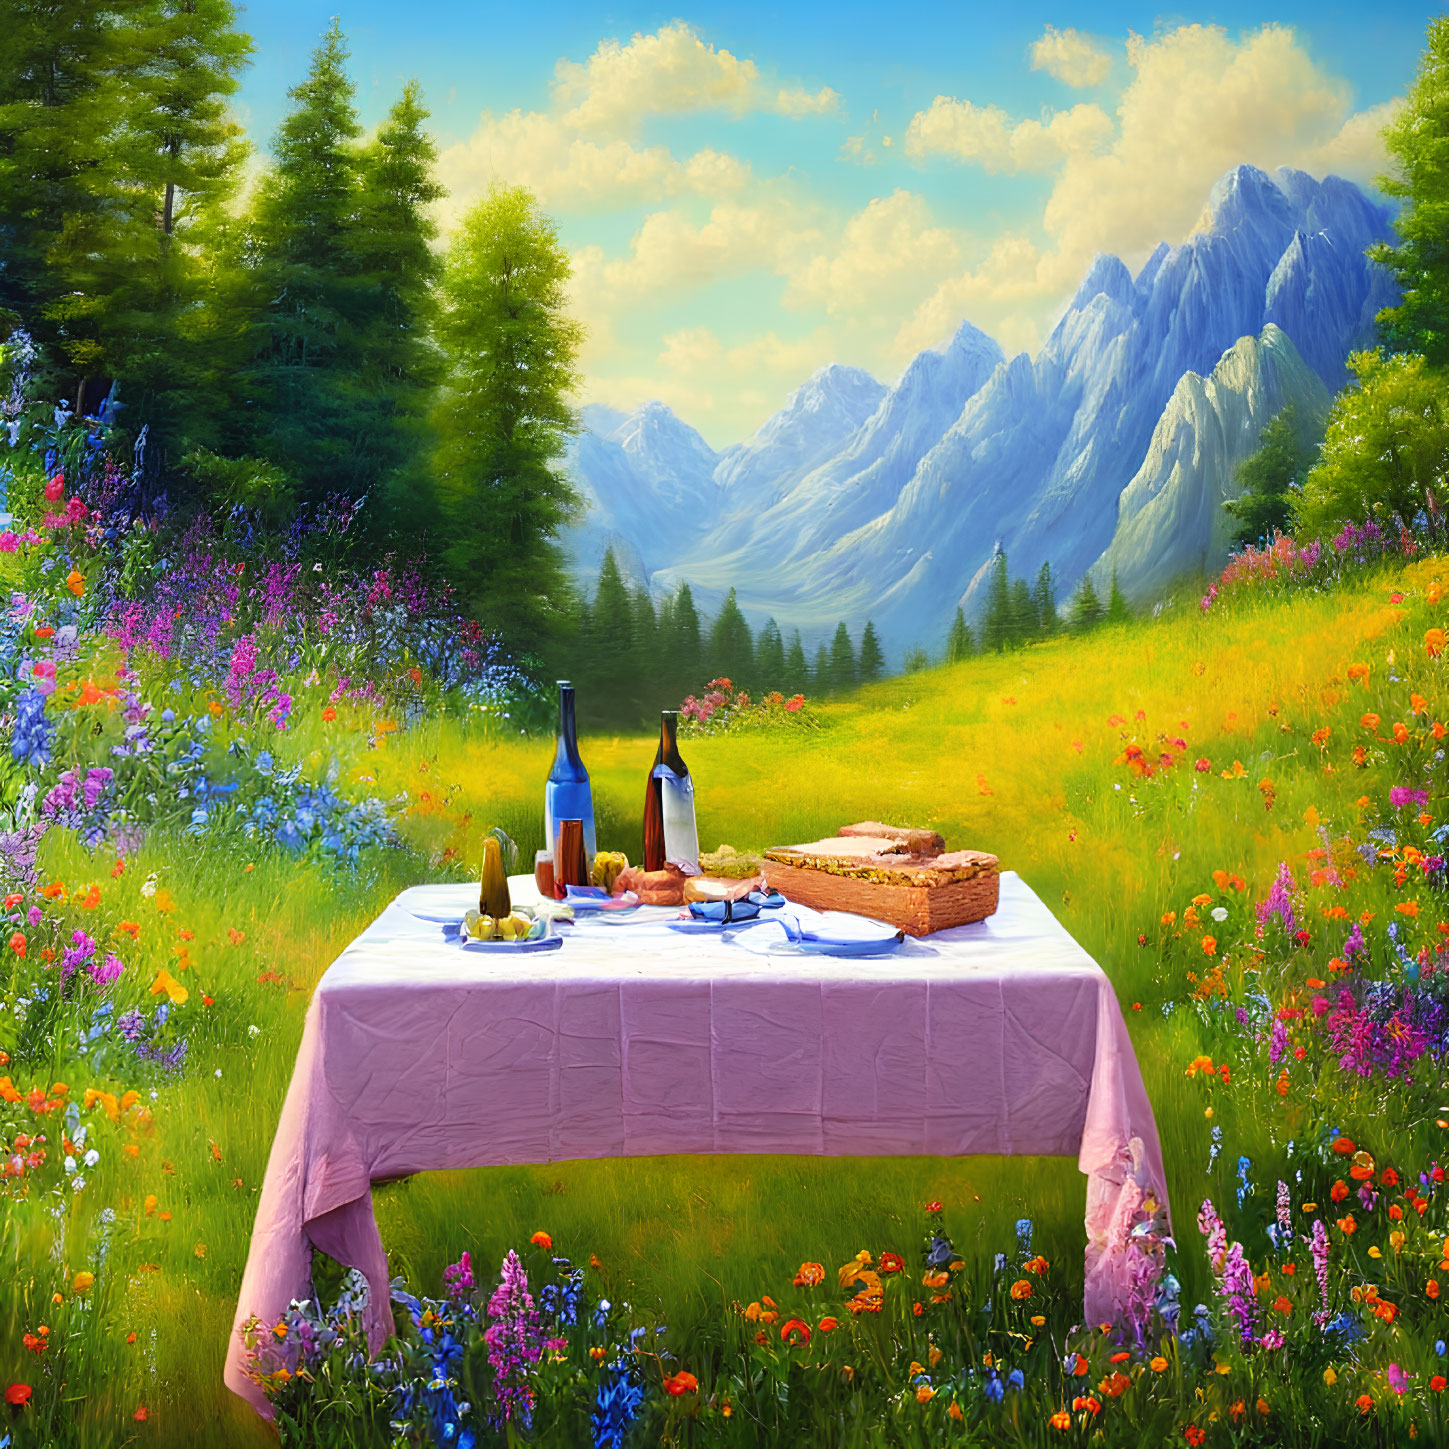 Scenic picnic setup in blooming meadow with food and wine, mountains in background